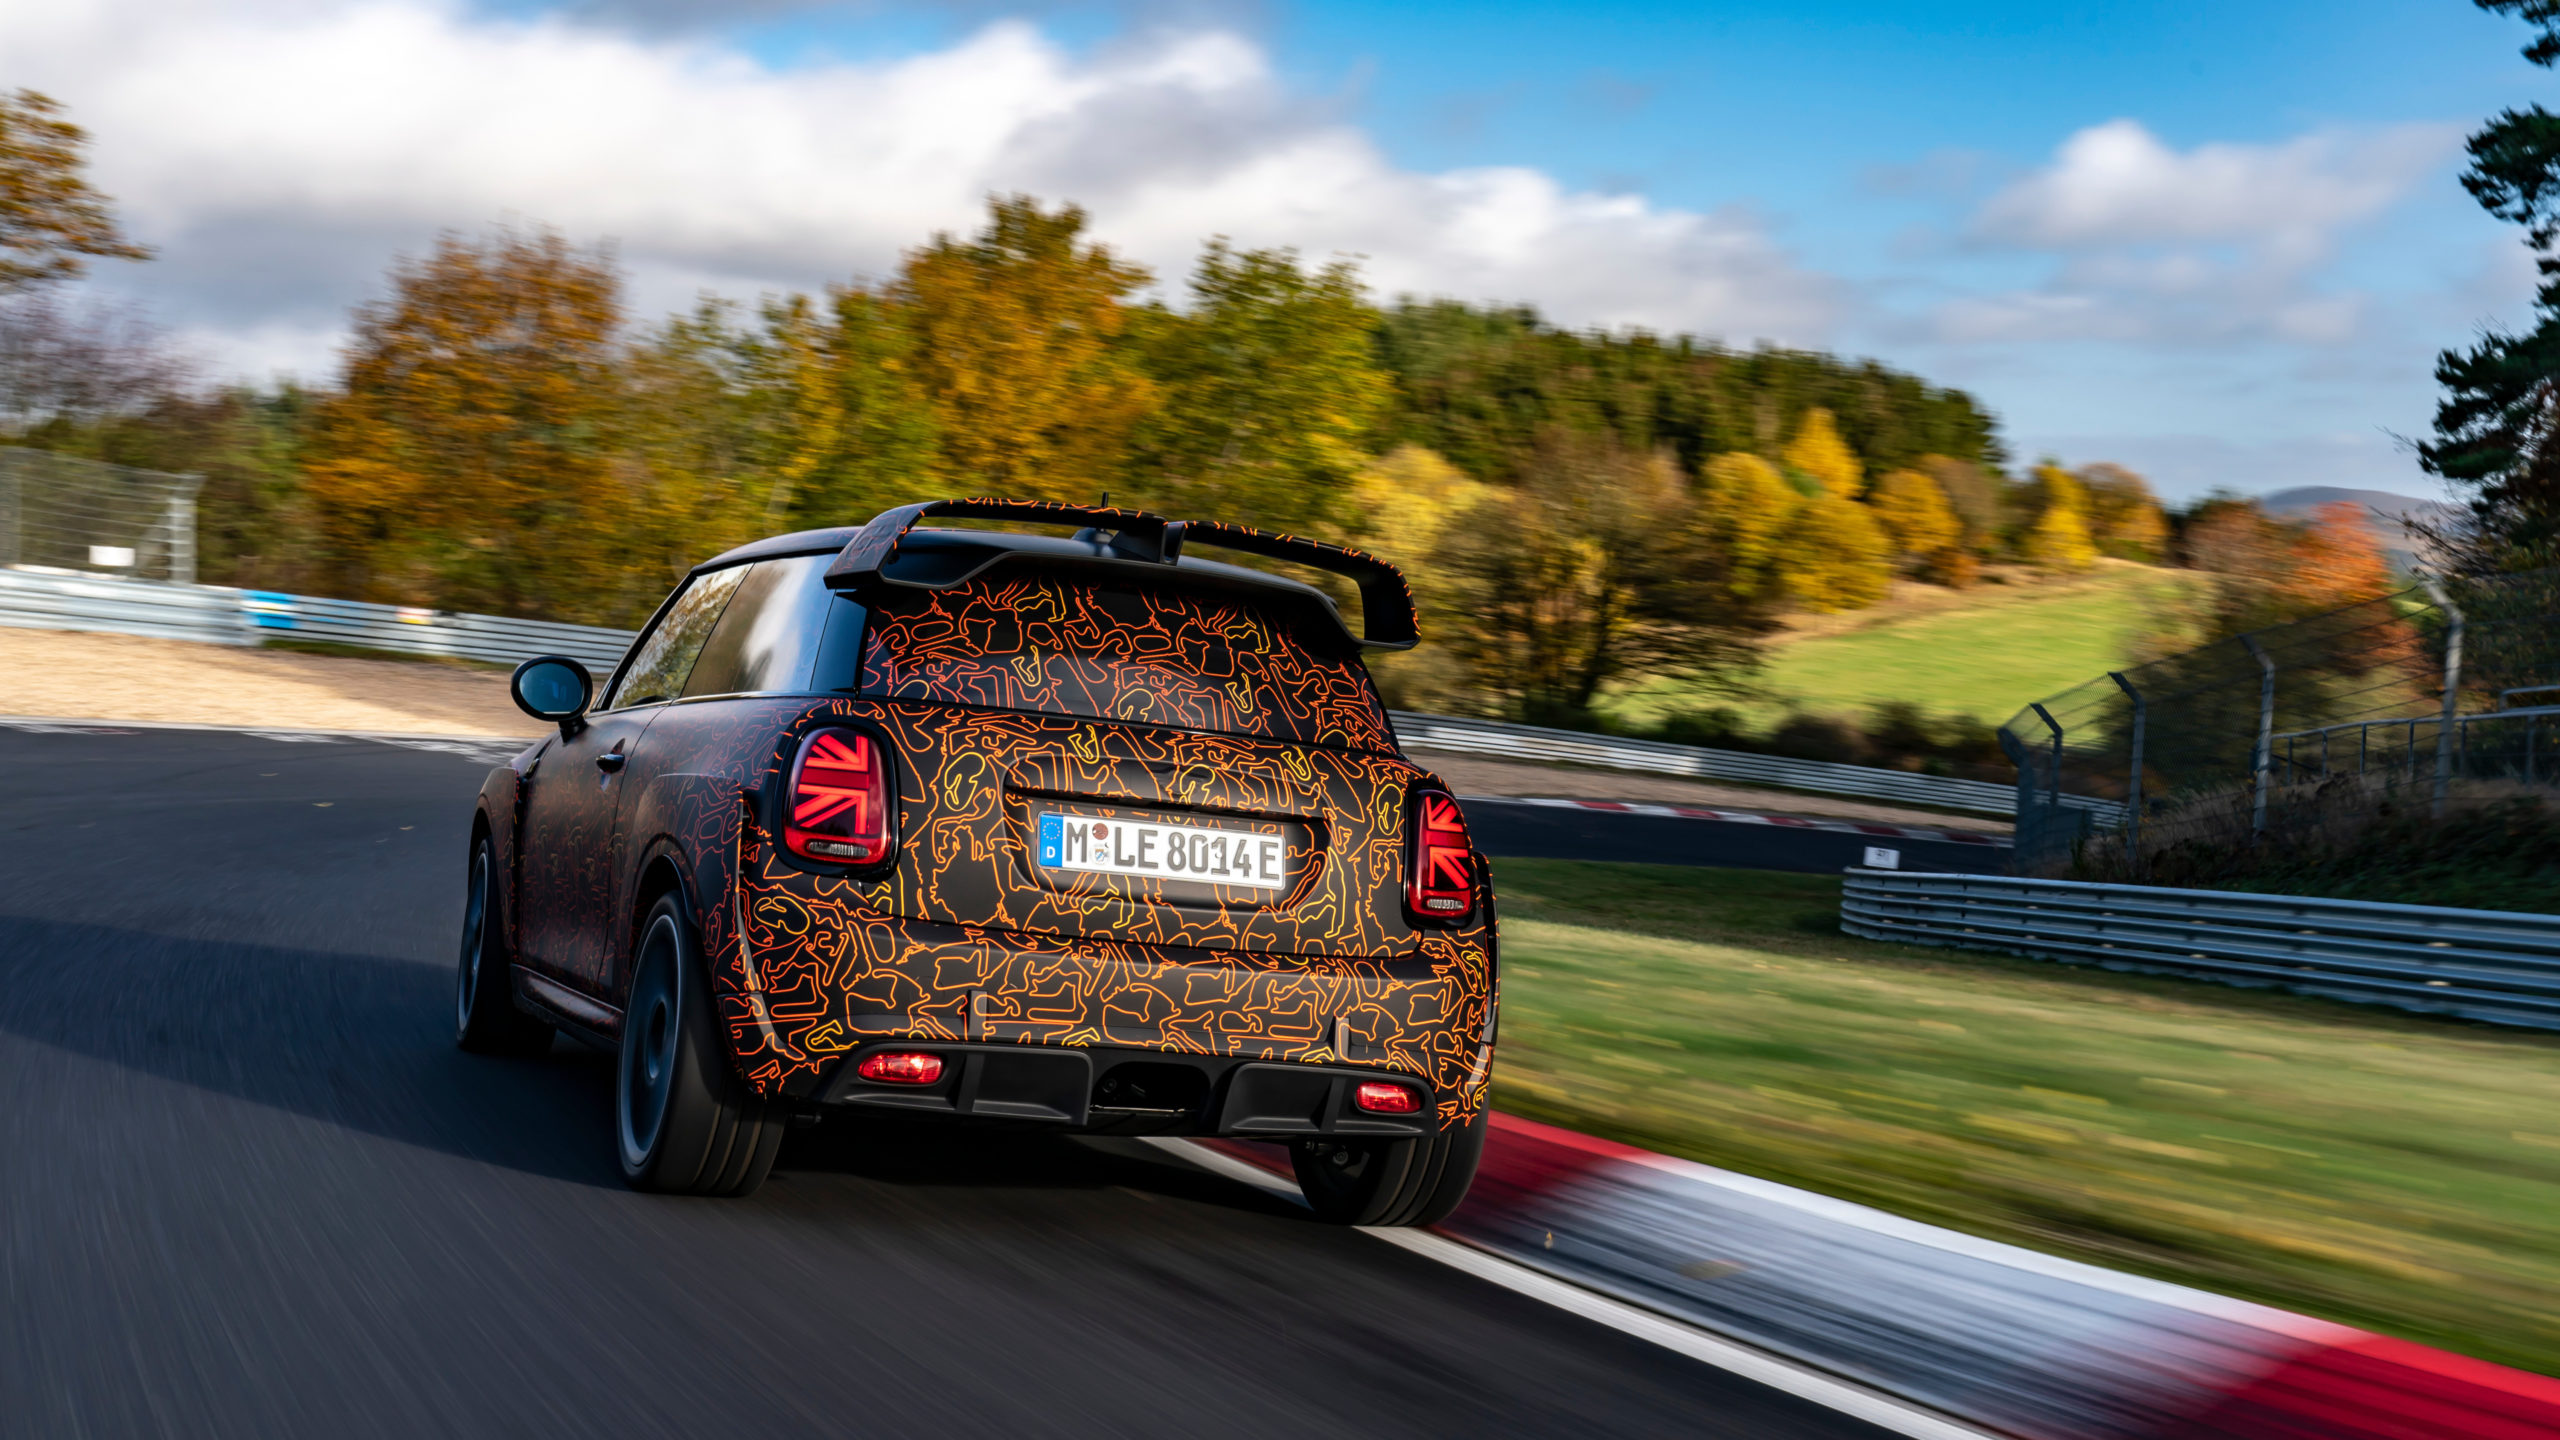 The New Mini John Cooper Works EV Prototype Is Covered In A Cool Easter Egg Camouflage